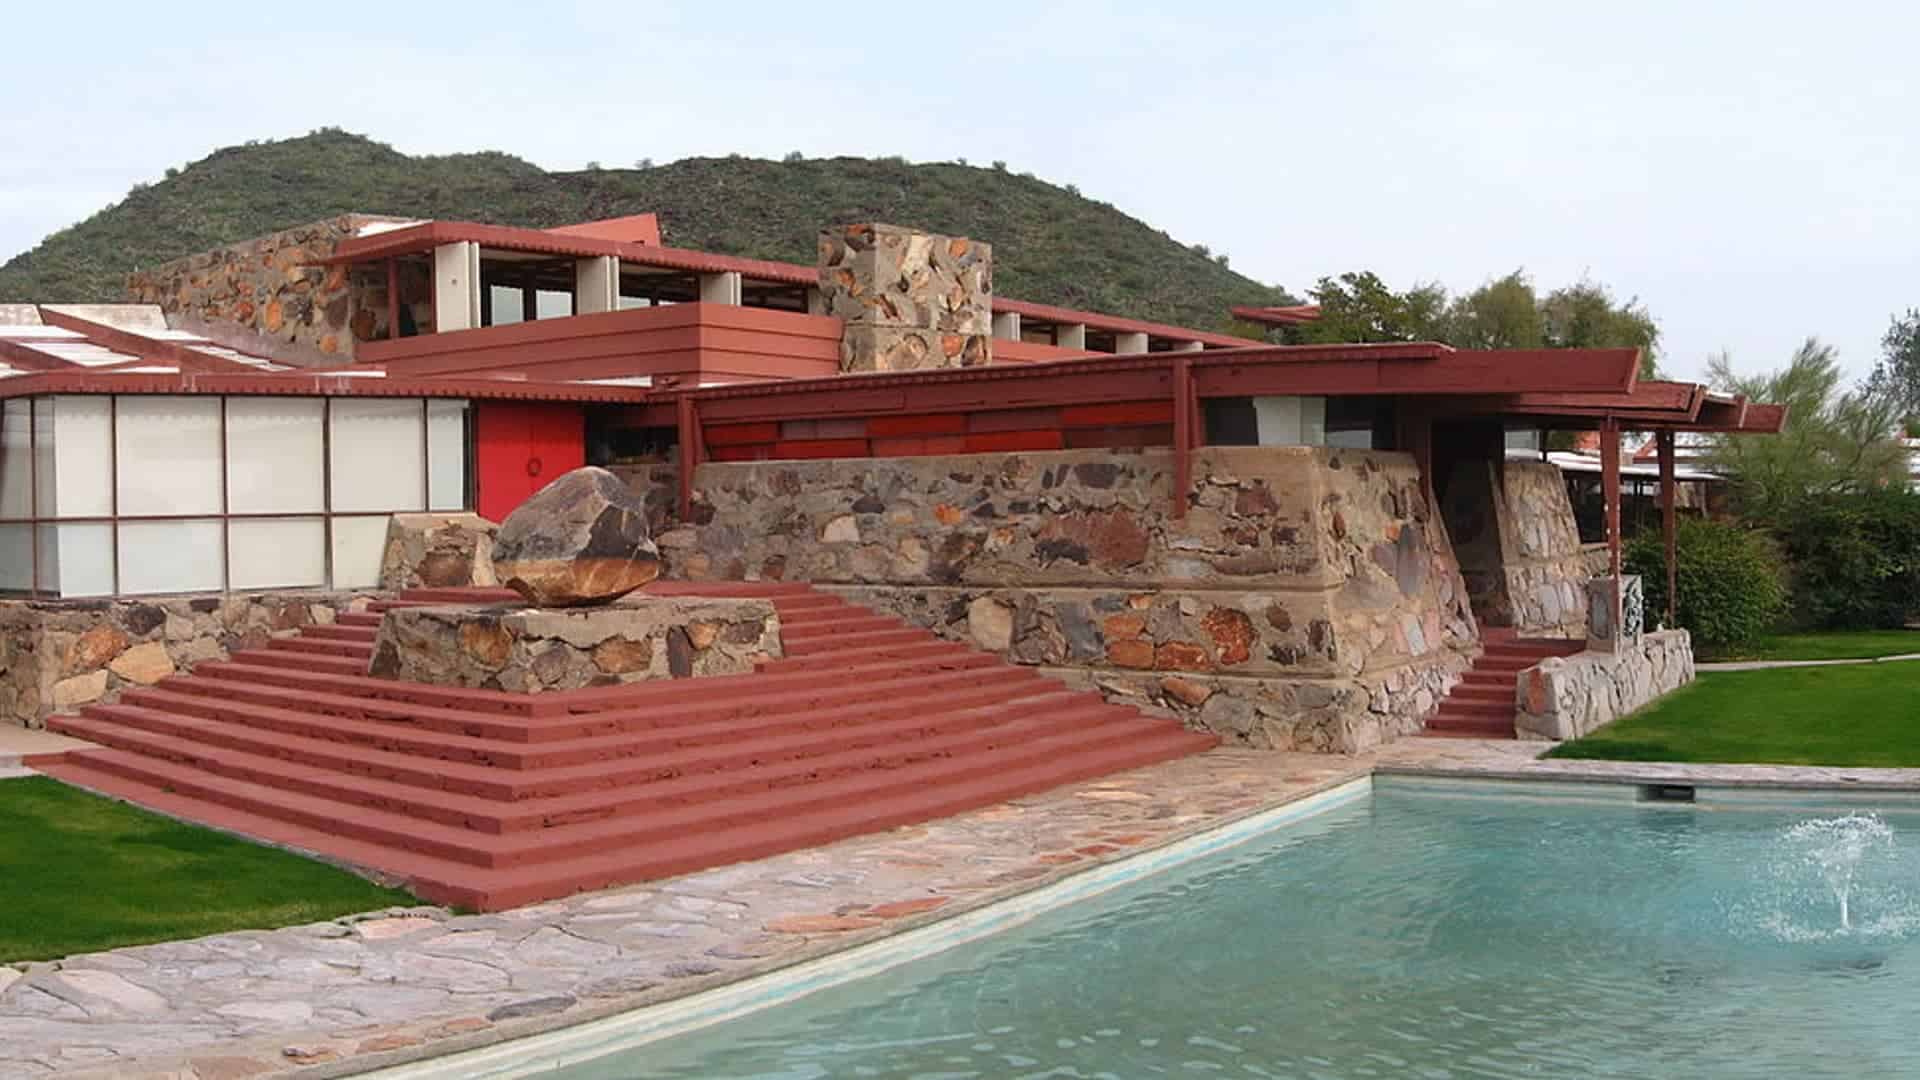 Outside of the taliesin west tours